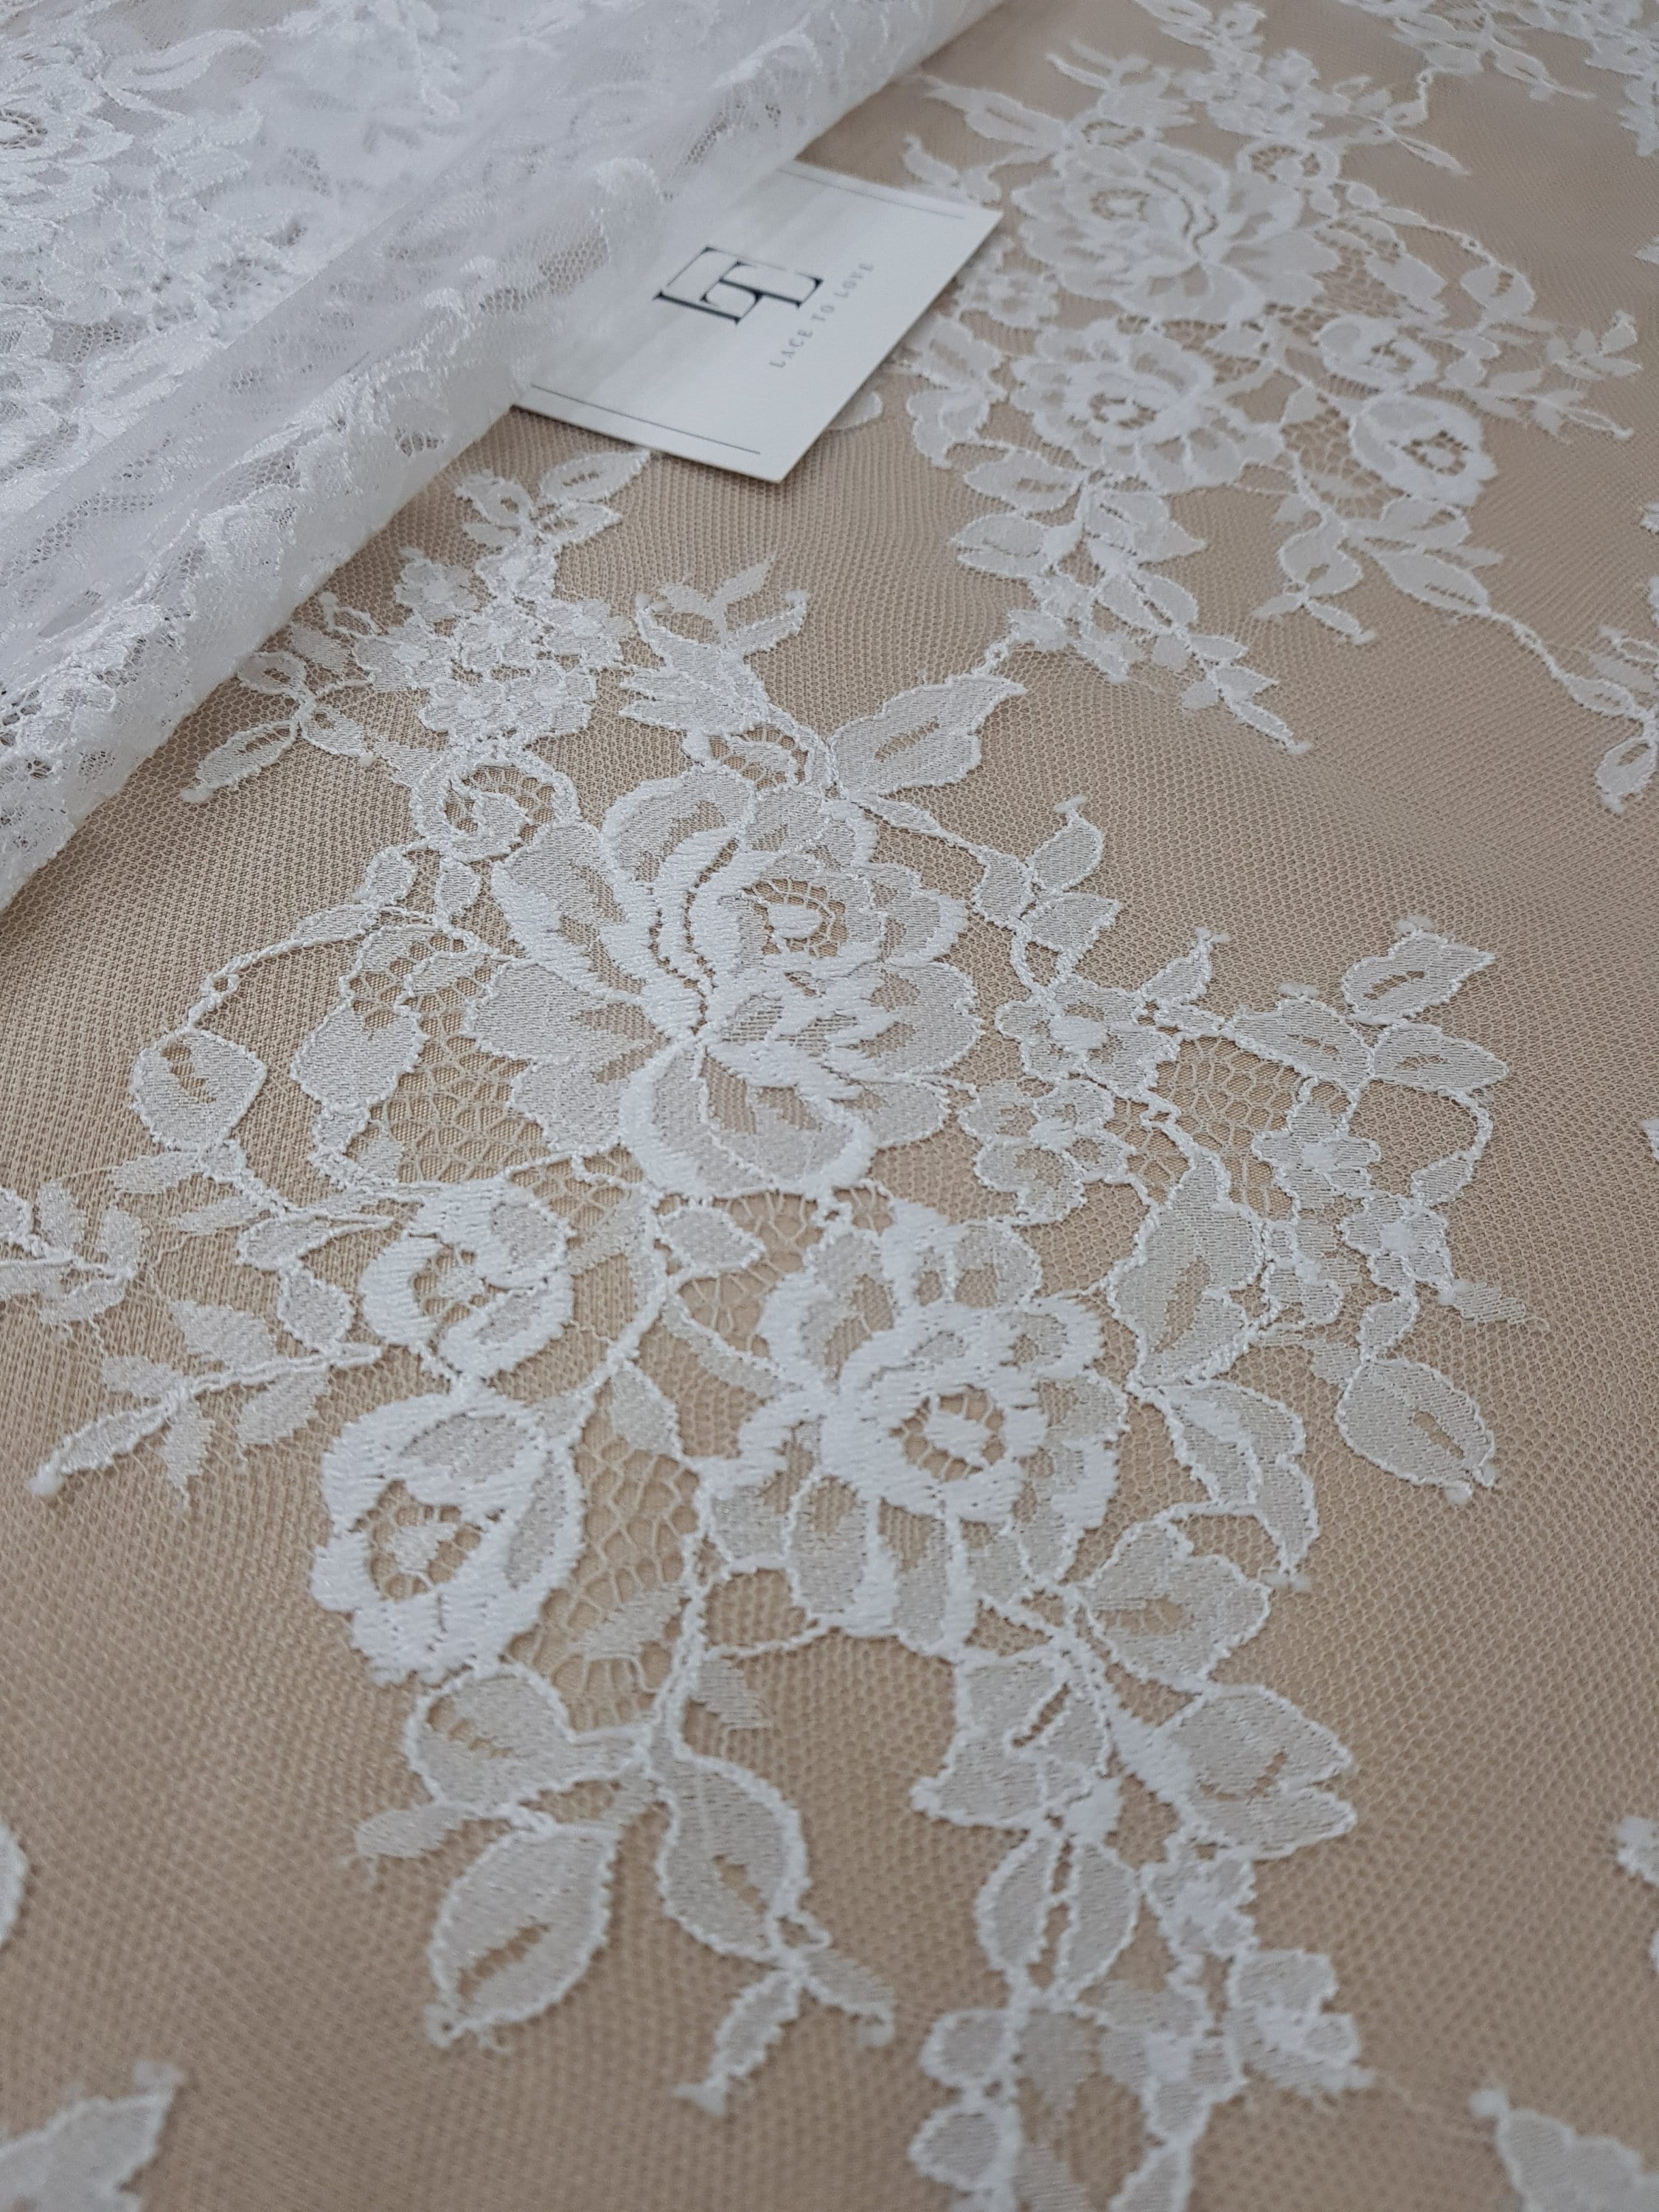 SAMPLE French Lace, White Lace Fabric, White Lace Material, Lace Fabric  Wedding, Lace Trim Veil, Spain Style Lace Trim 